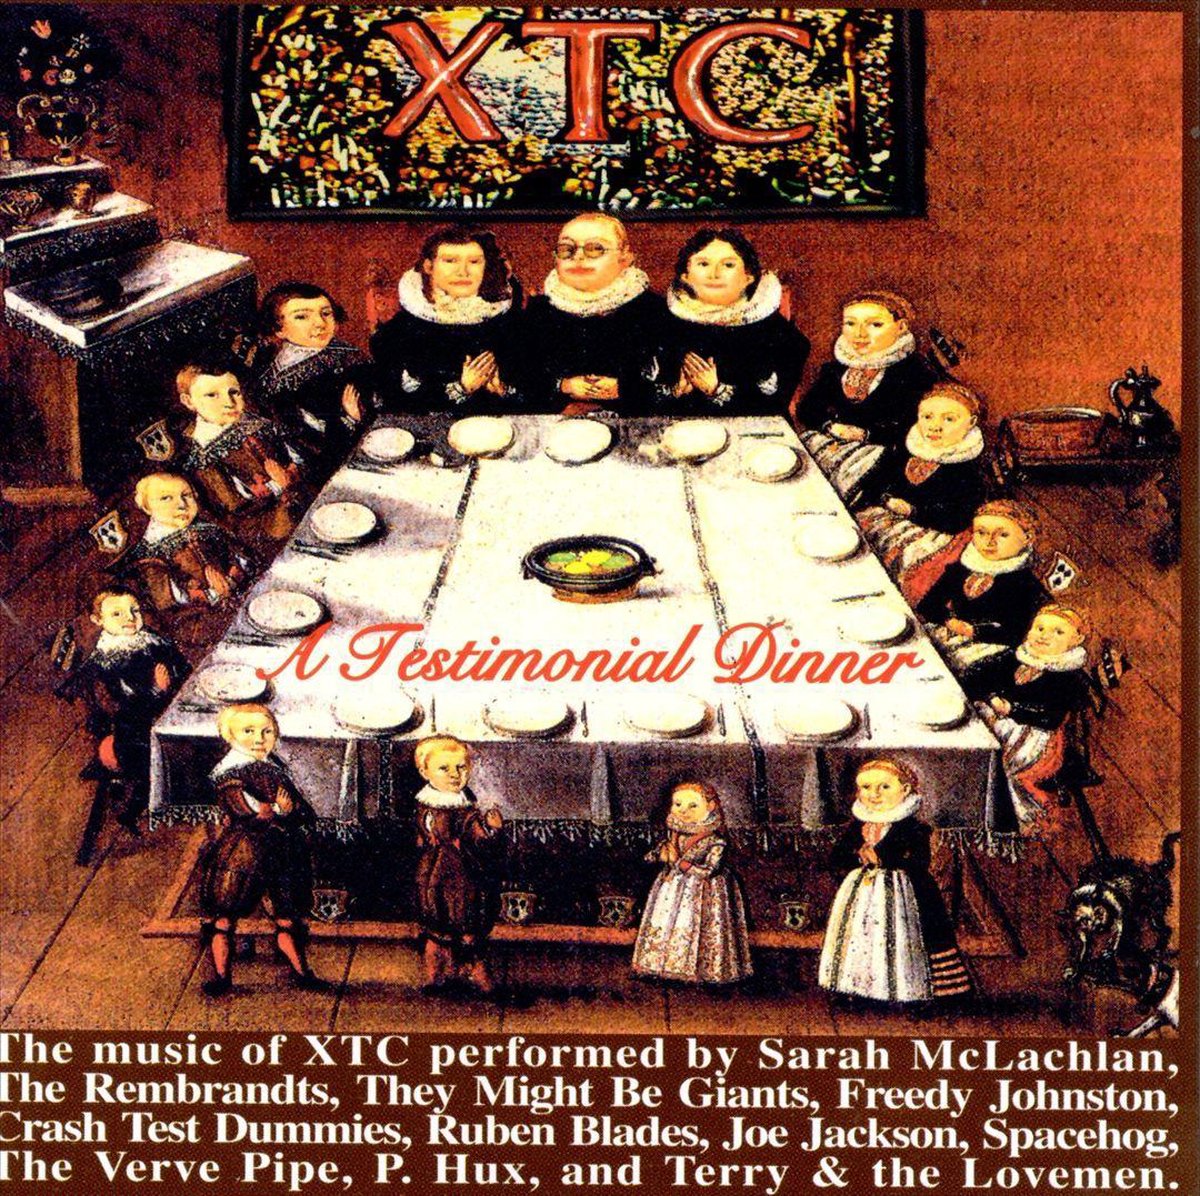 A Testimonial Dinner: The Songs Of XTC - various artists